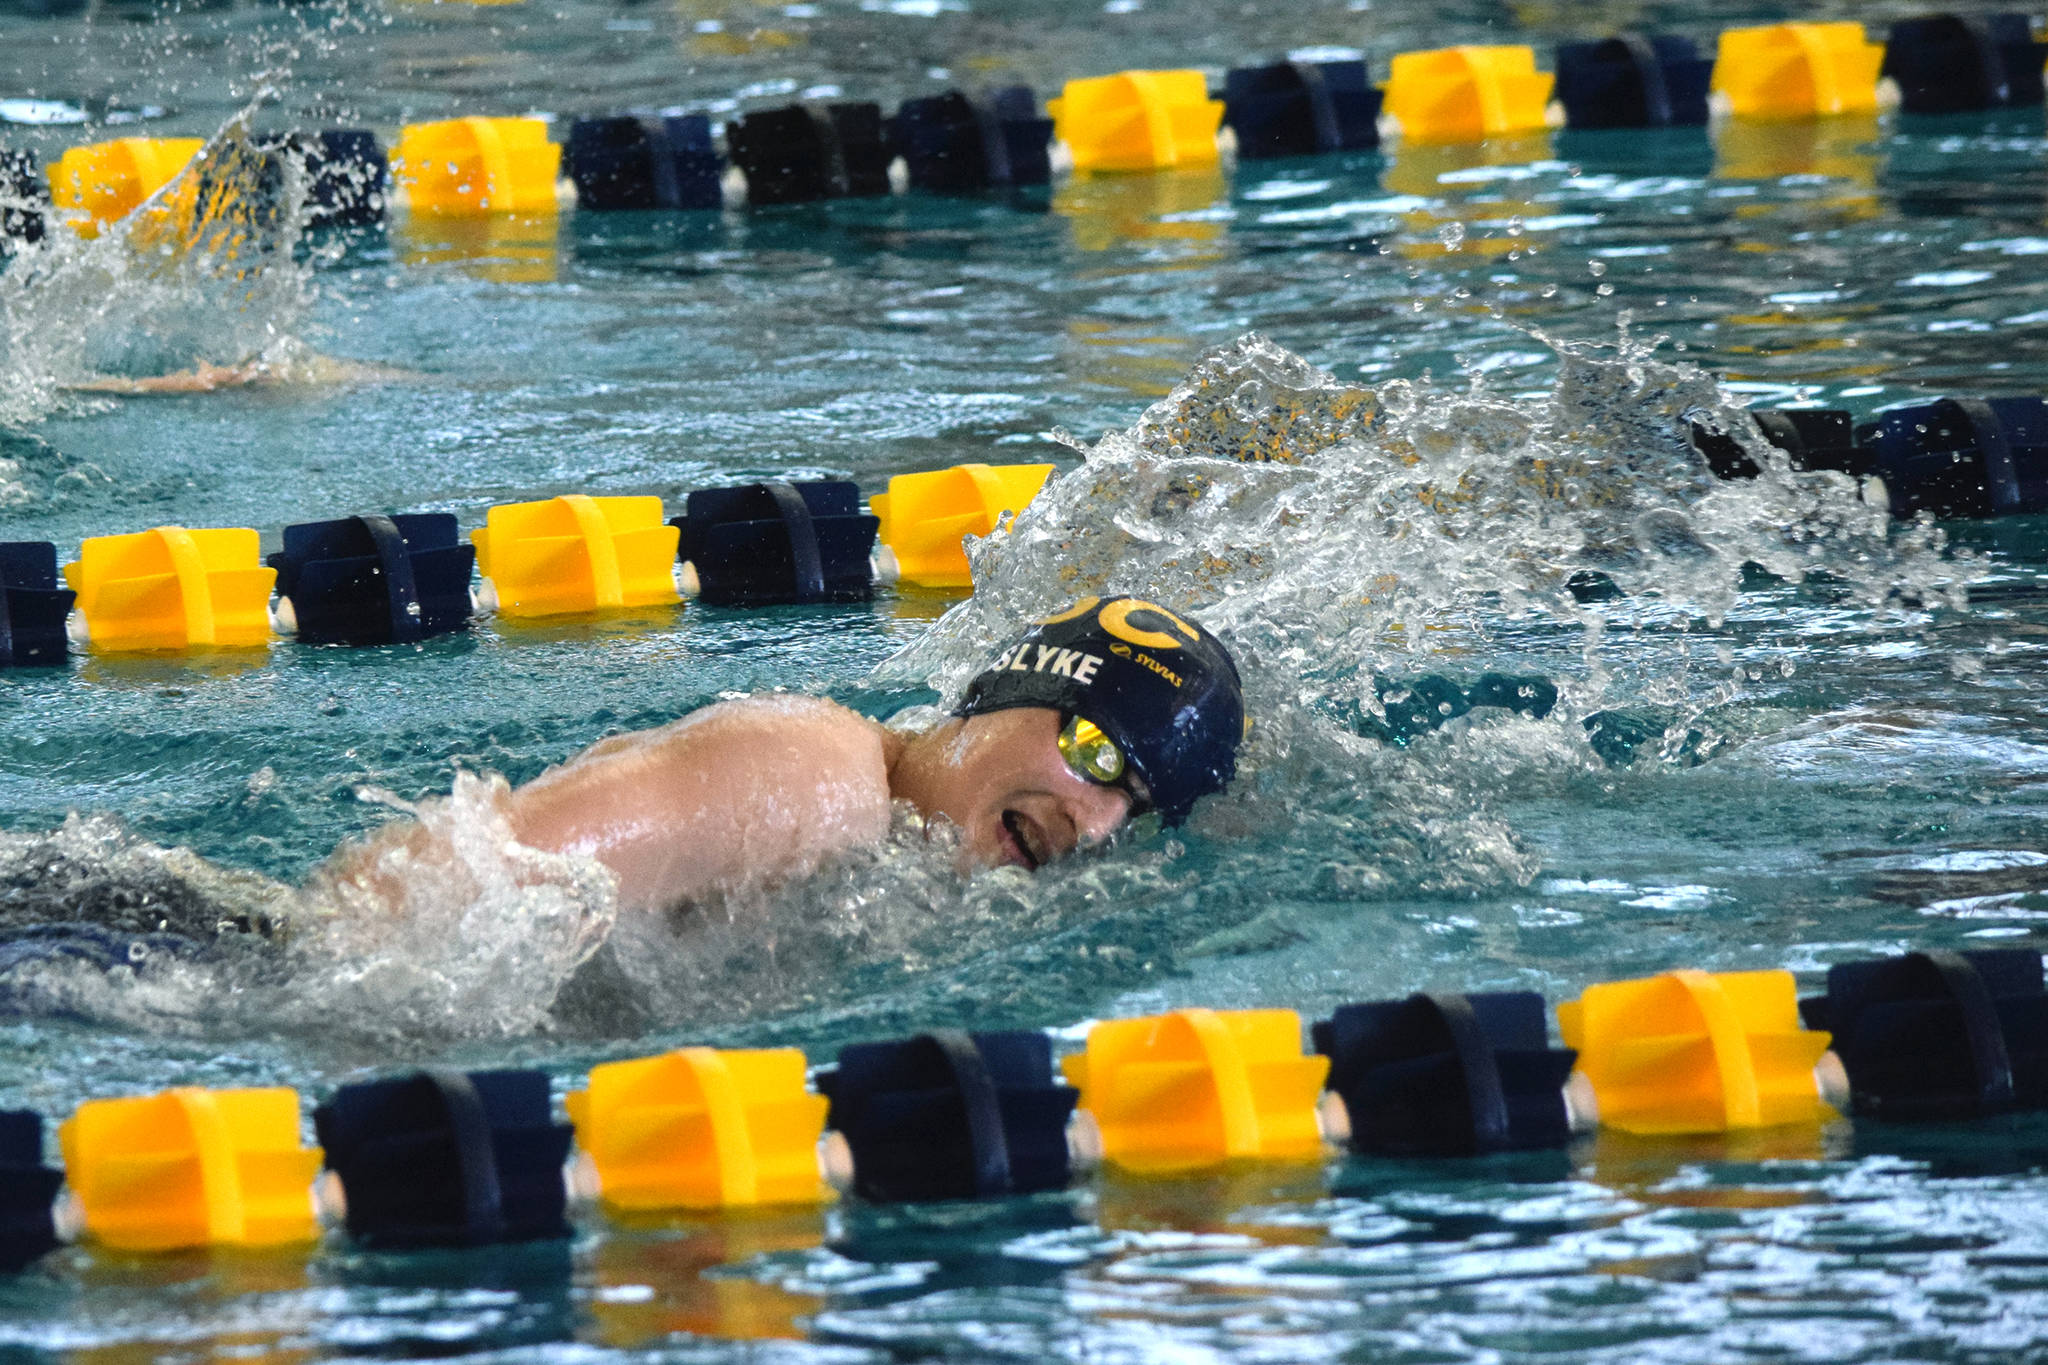 Glacier Swim Club’s Chaz VanSlyke swims the 500-yard freestyle on the second day of the Savannah Cayce Southeast Championships at the Dimond Park Aquatic Center on Saturday, April 6, 2019. (Nolin Ainsworth | Juneau Empire)